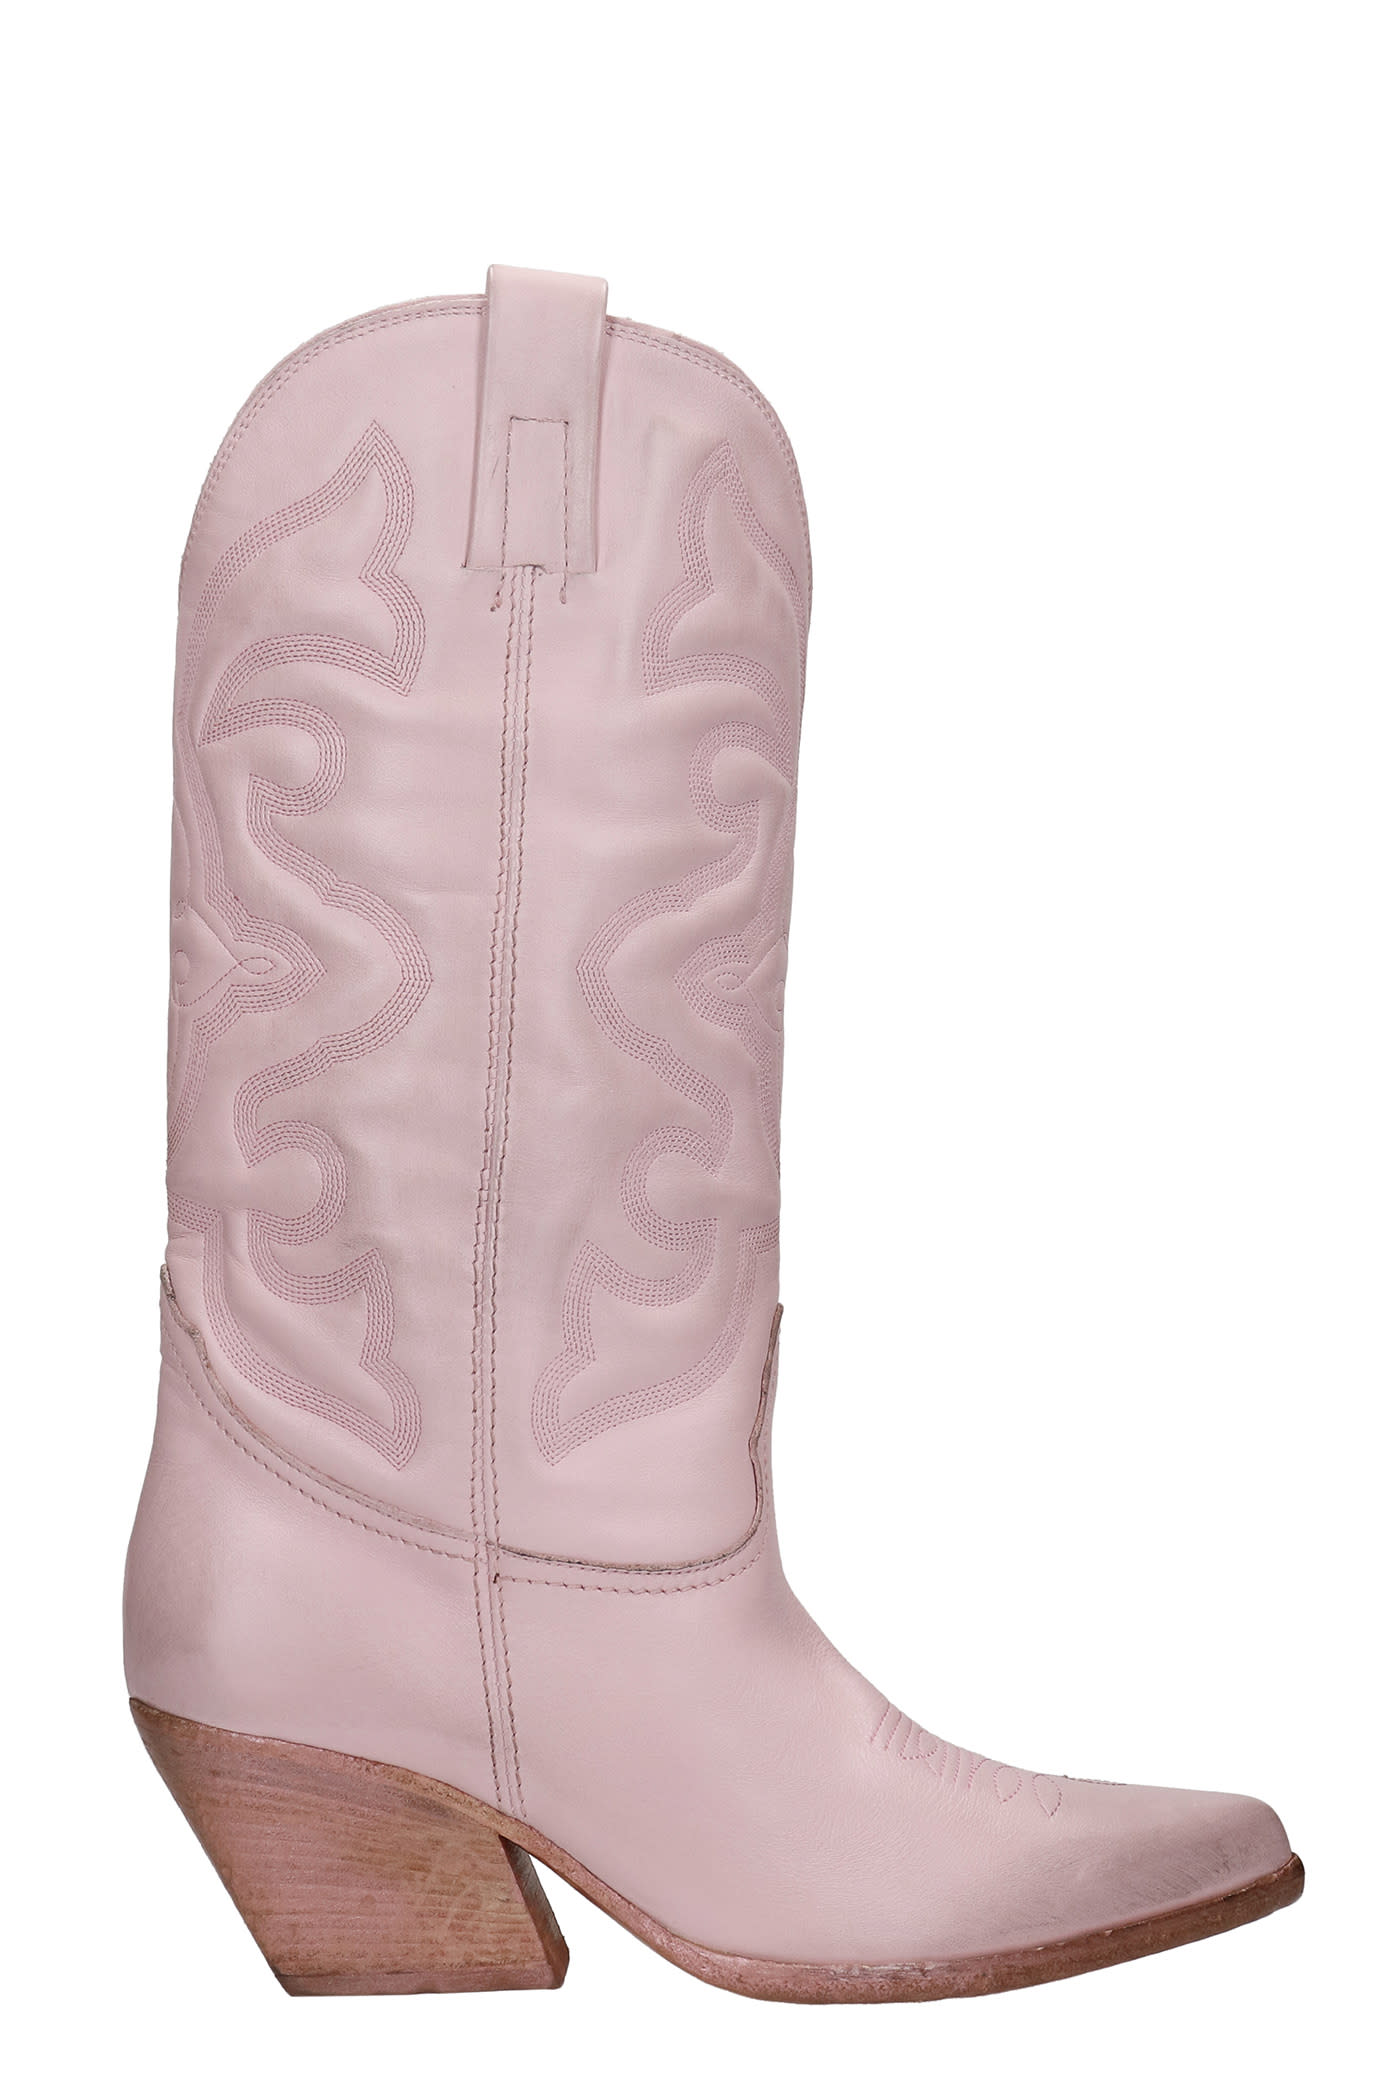 Elena Iachi Texan Boots In Rose-pink Leather